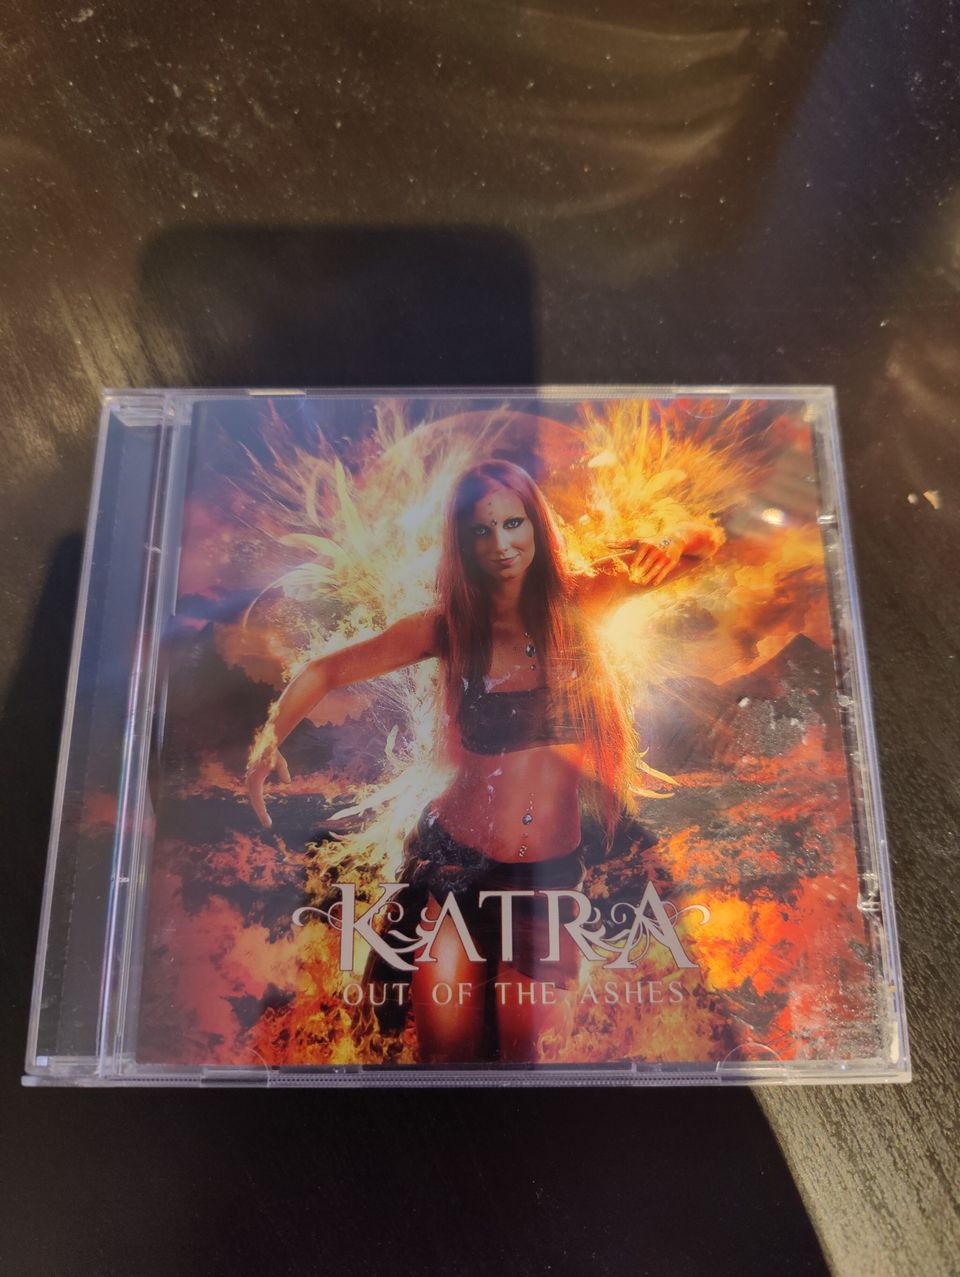 Katra Out of the Ashes VG+/EX